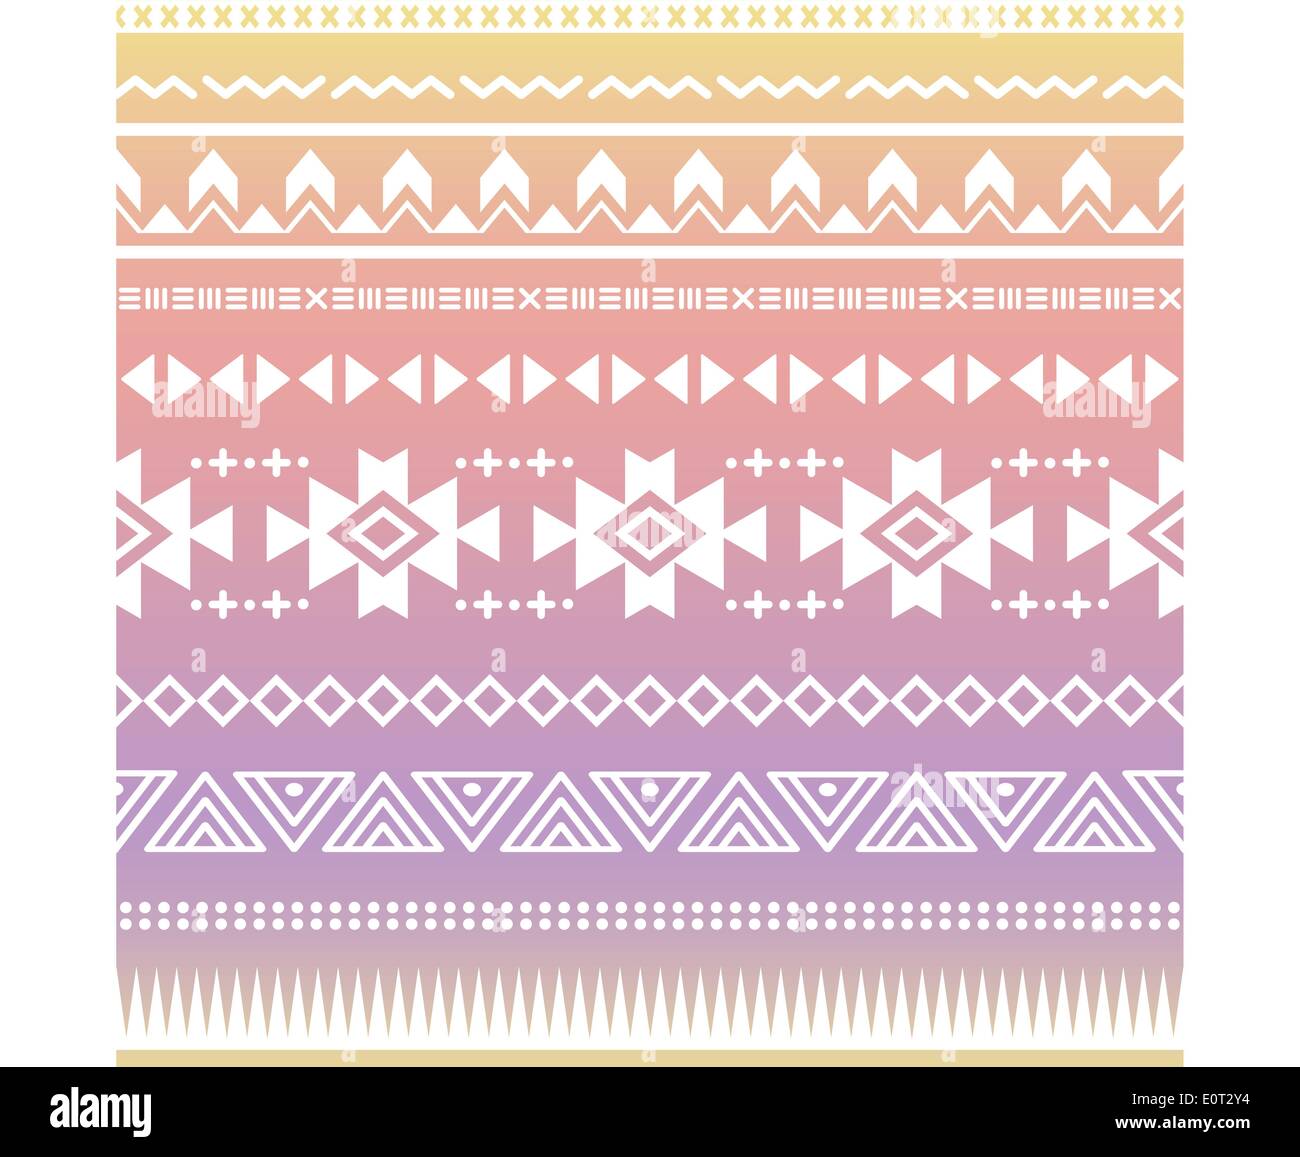 Tribal aztec ombre seamless pattern Stock Vector